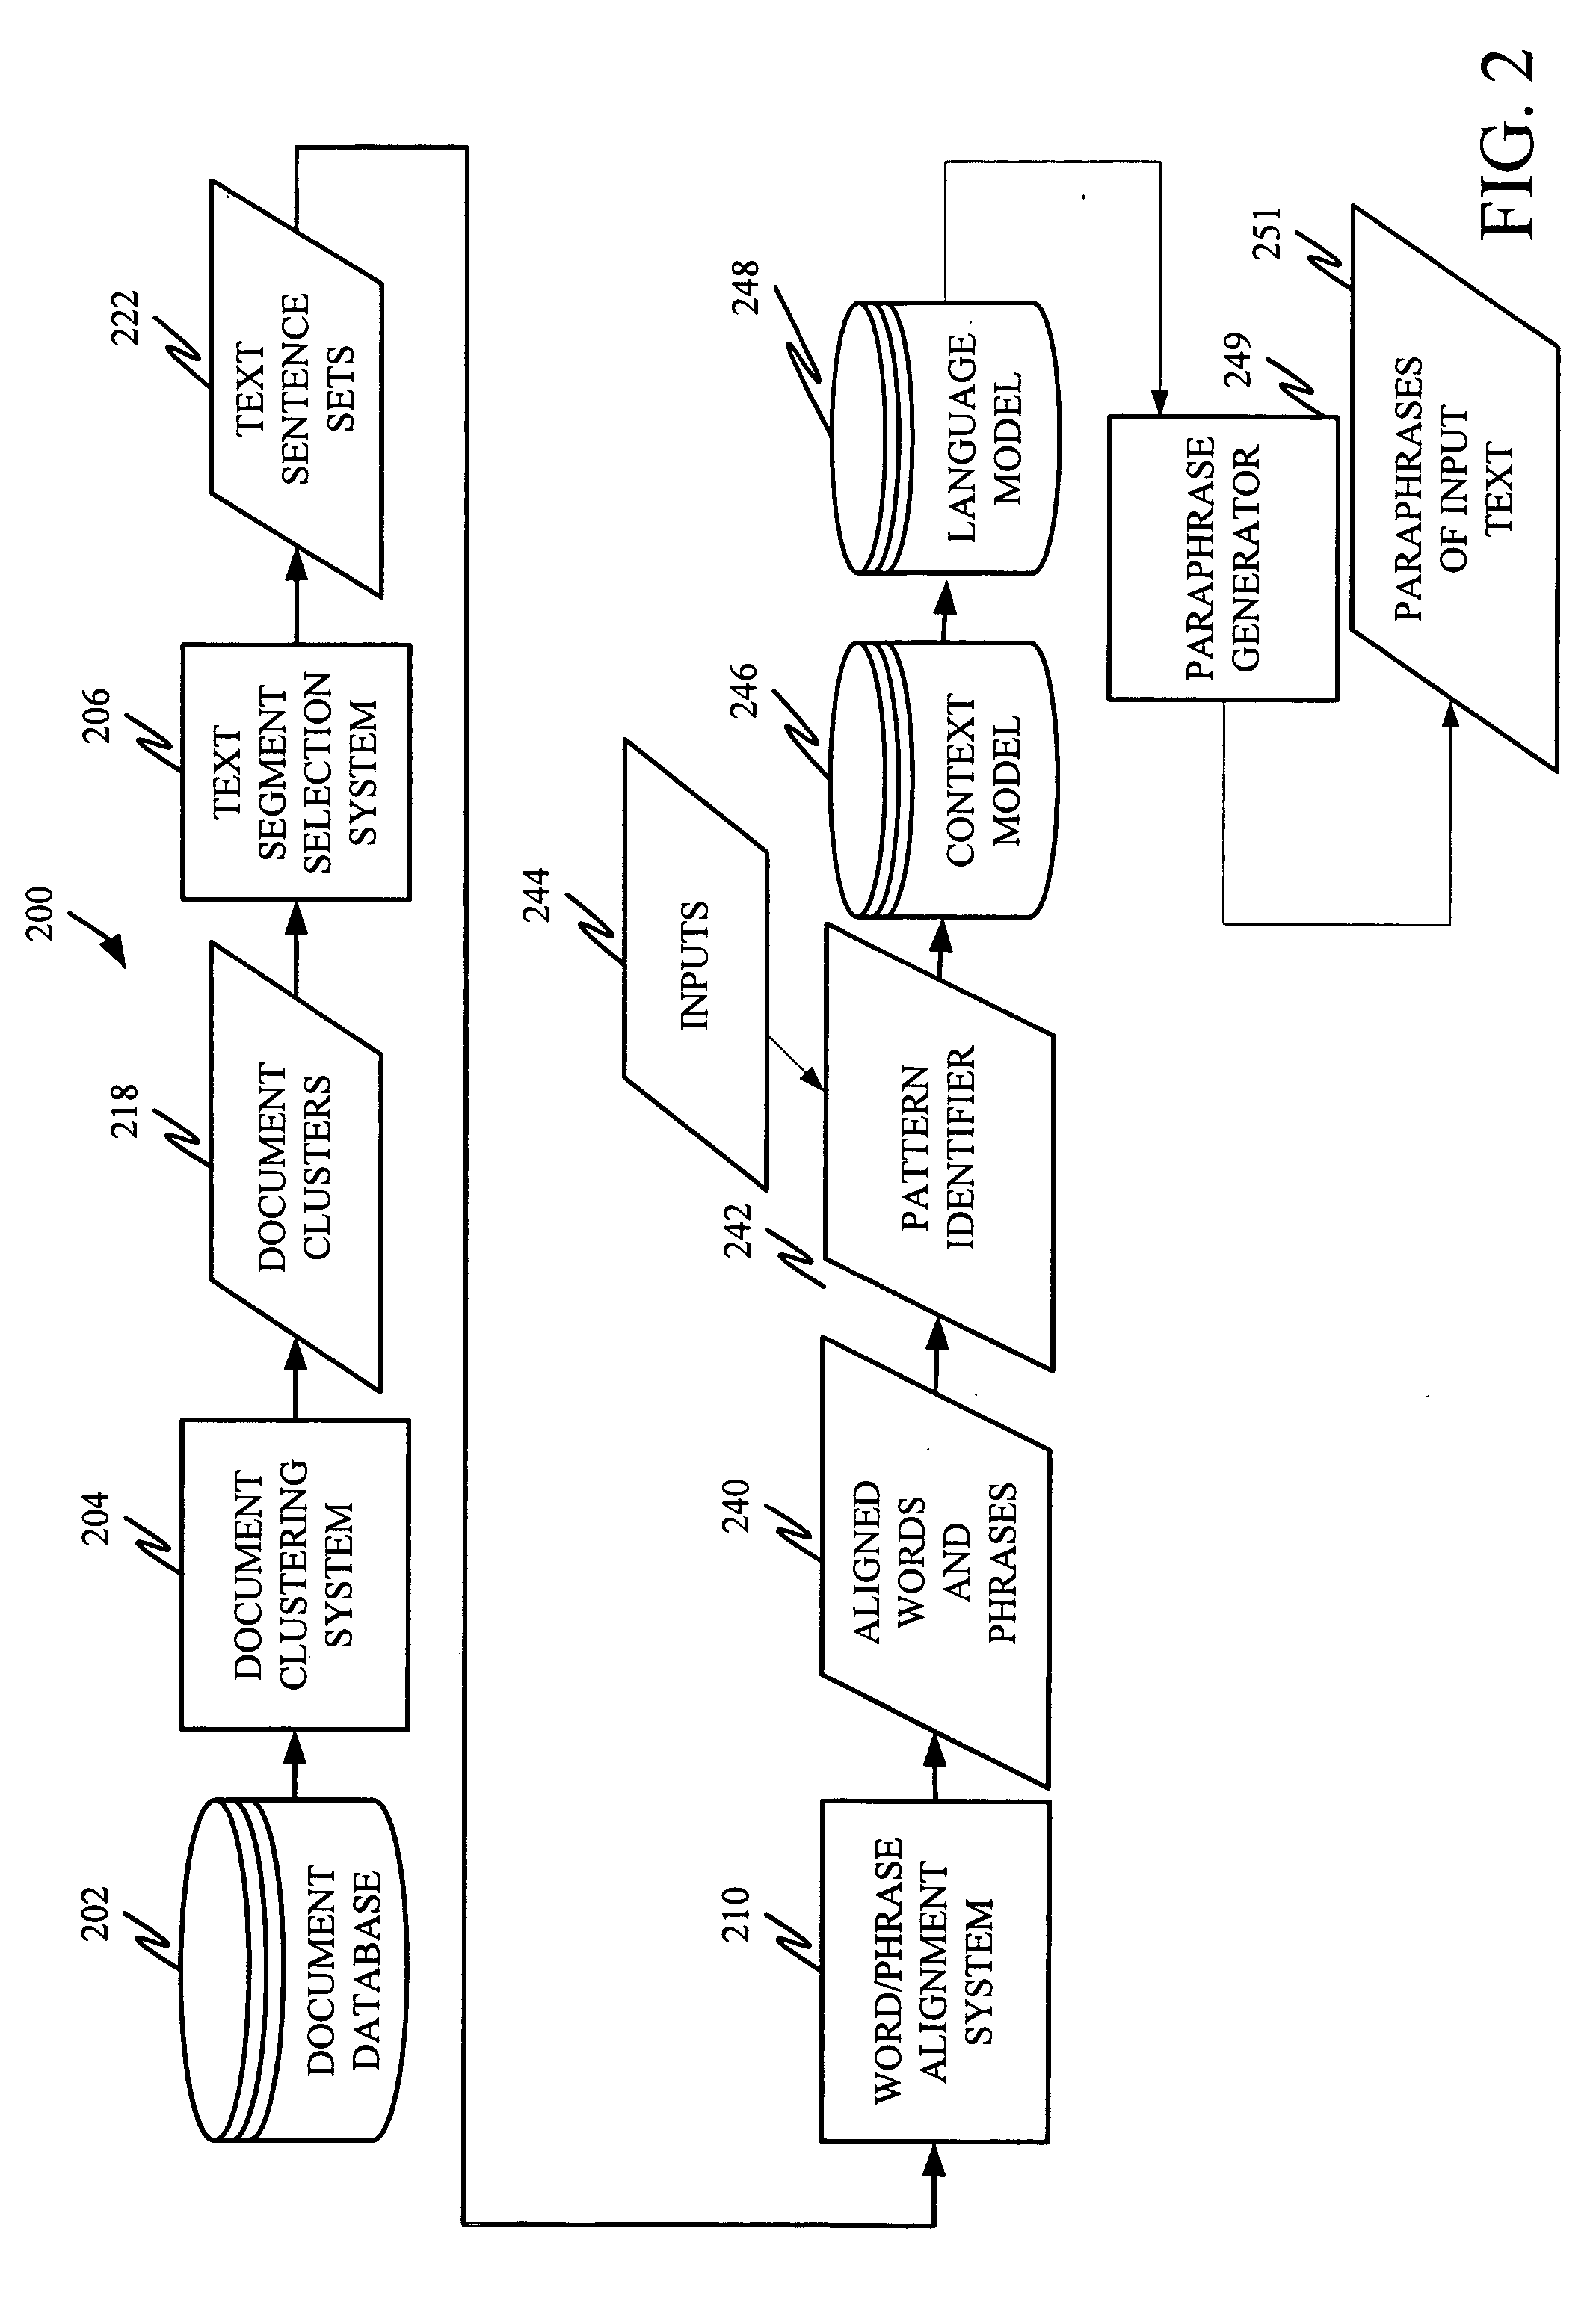 Unsupervised learning of paraphrase/translation alternations and selective application thereof